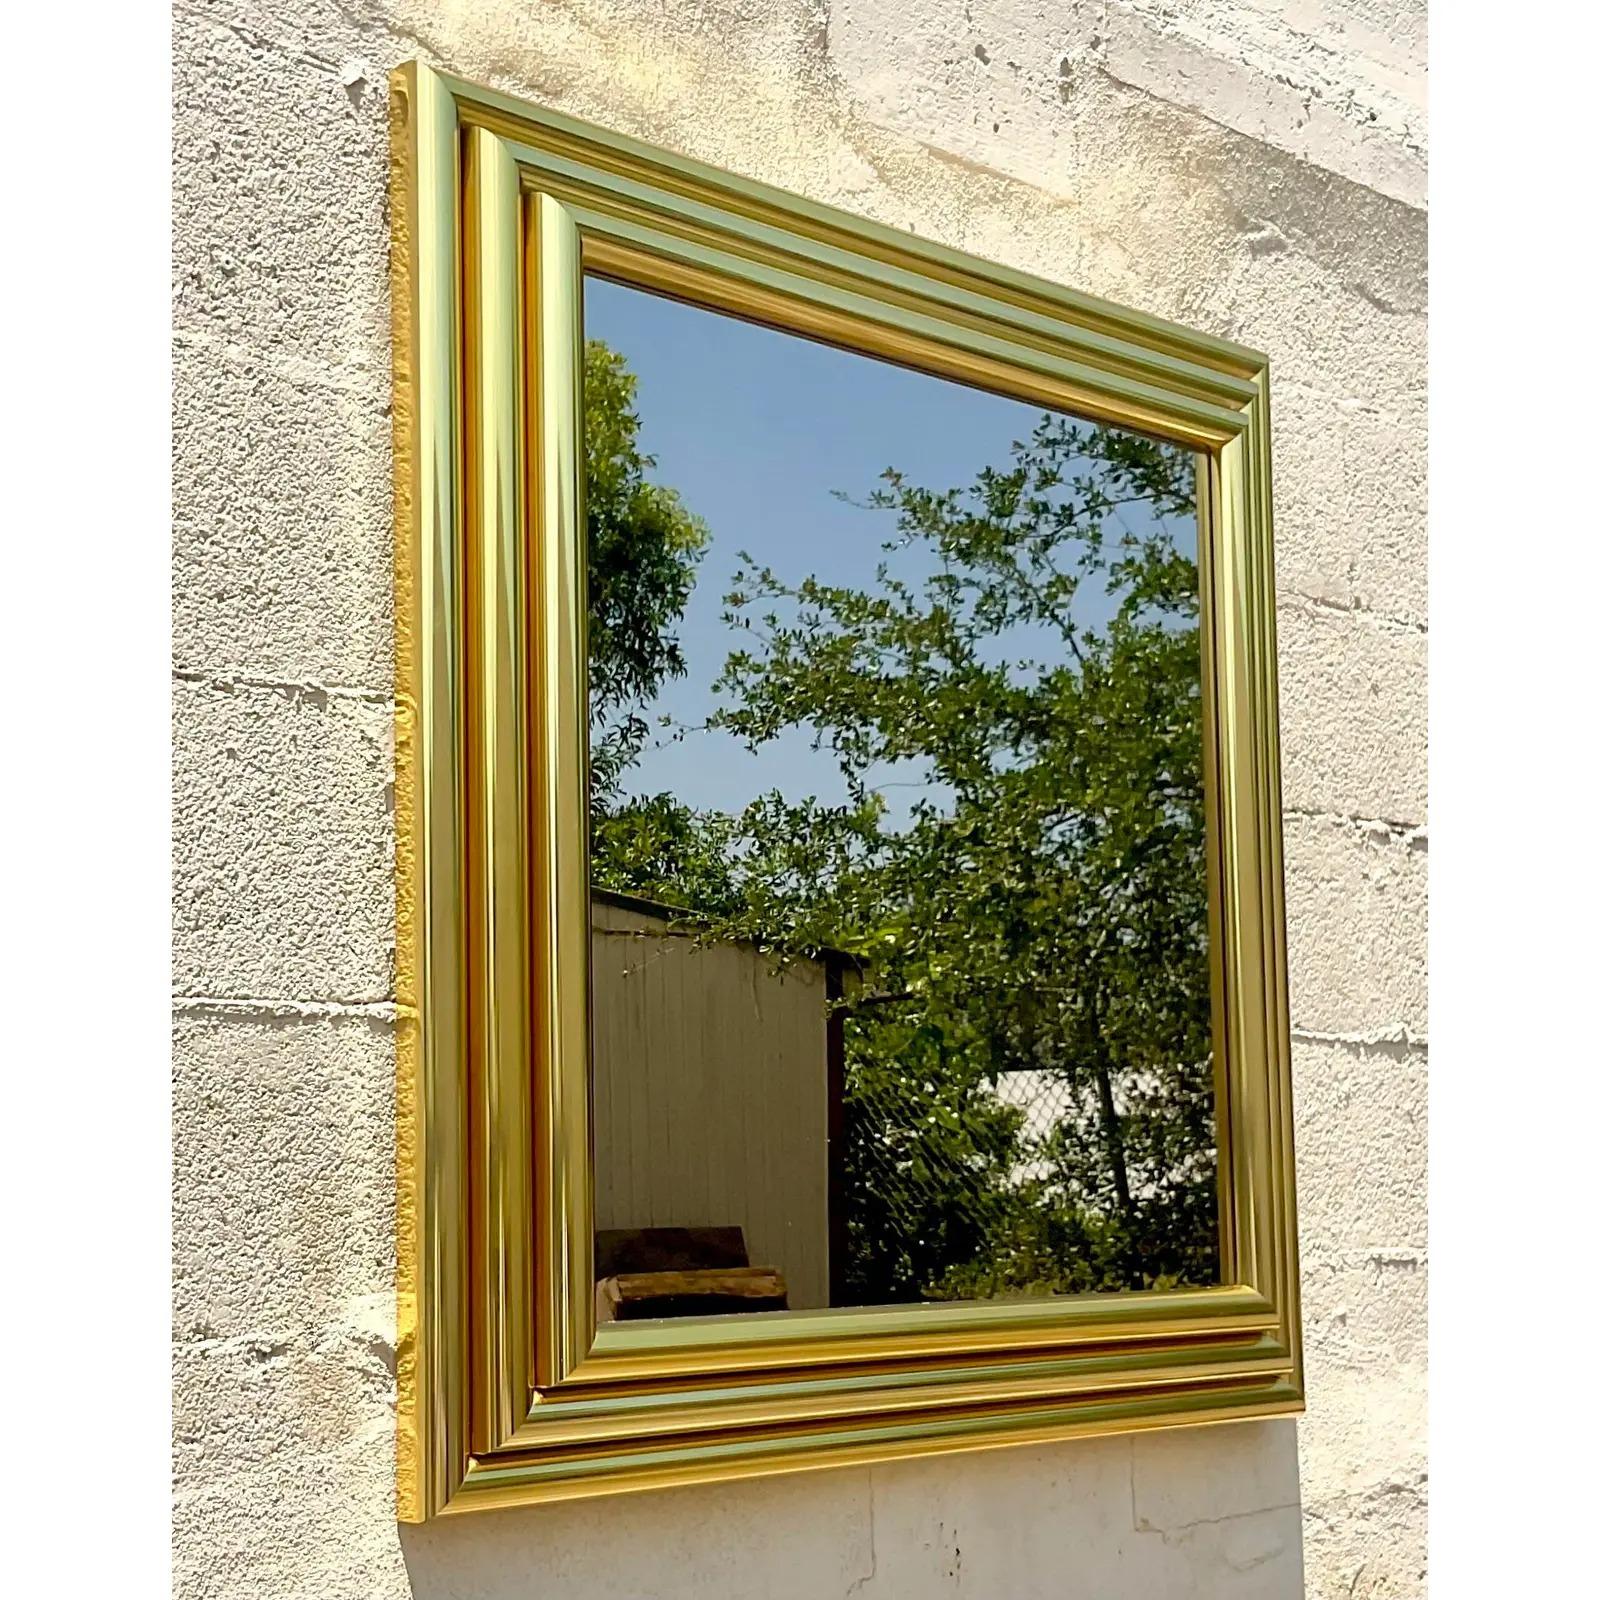 A fantastic vintage 80s wall mirror. Made by the iconic Greg Copeland group. A polished brass series of rods in a descending design. Acquired from a Palm Beach estate.